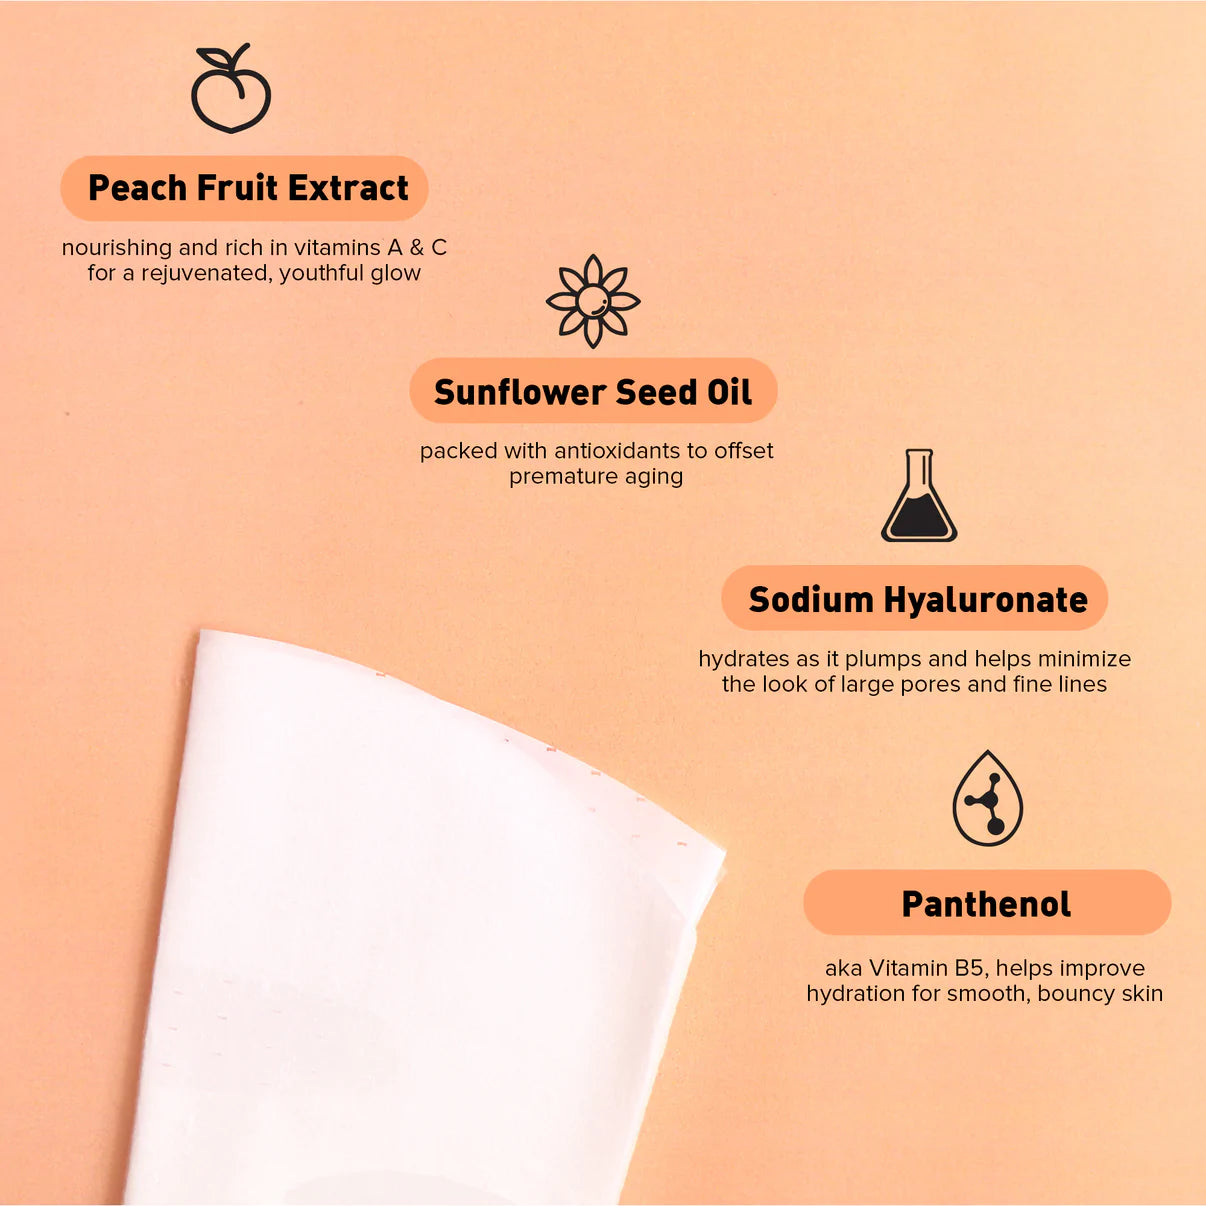  Image of the ingredients in the mask with icons of a peach, sunflower seed, beaker, and element. It states it has peach fruit extract, sunflower seed oil, sodium hyaluronate and panthenol